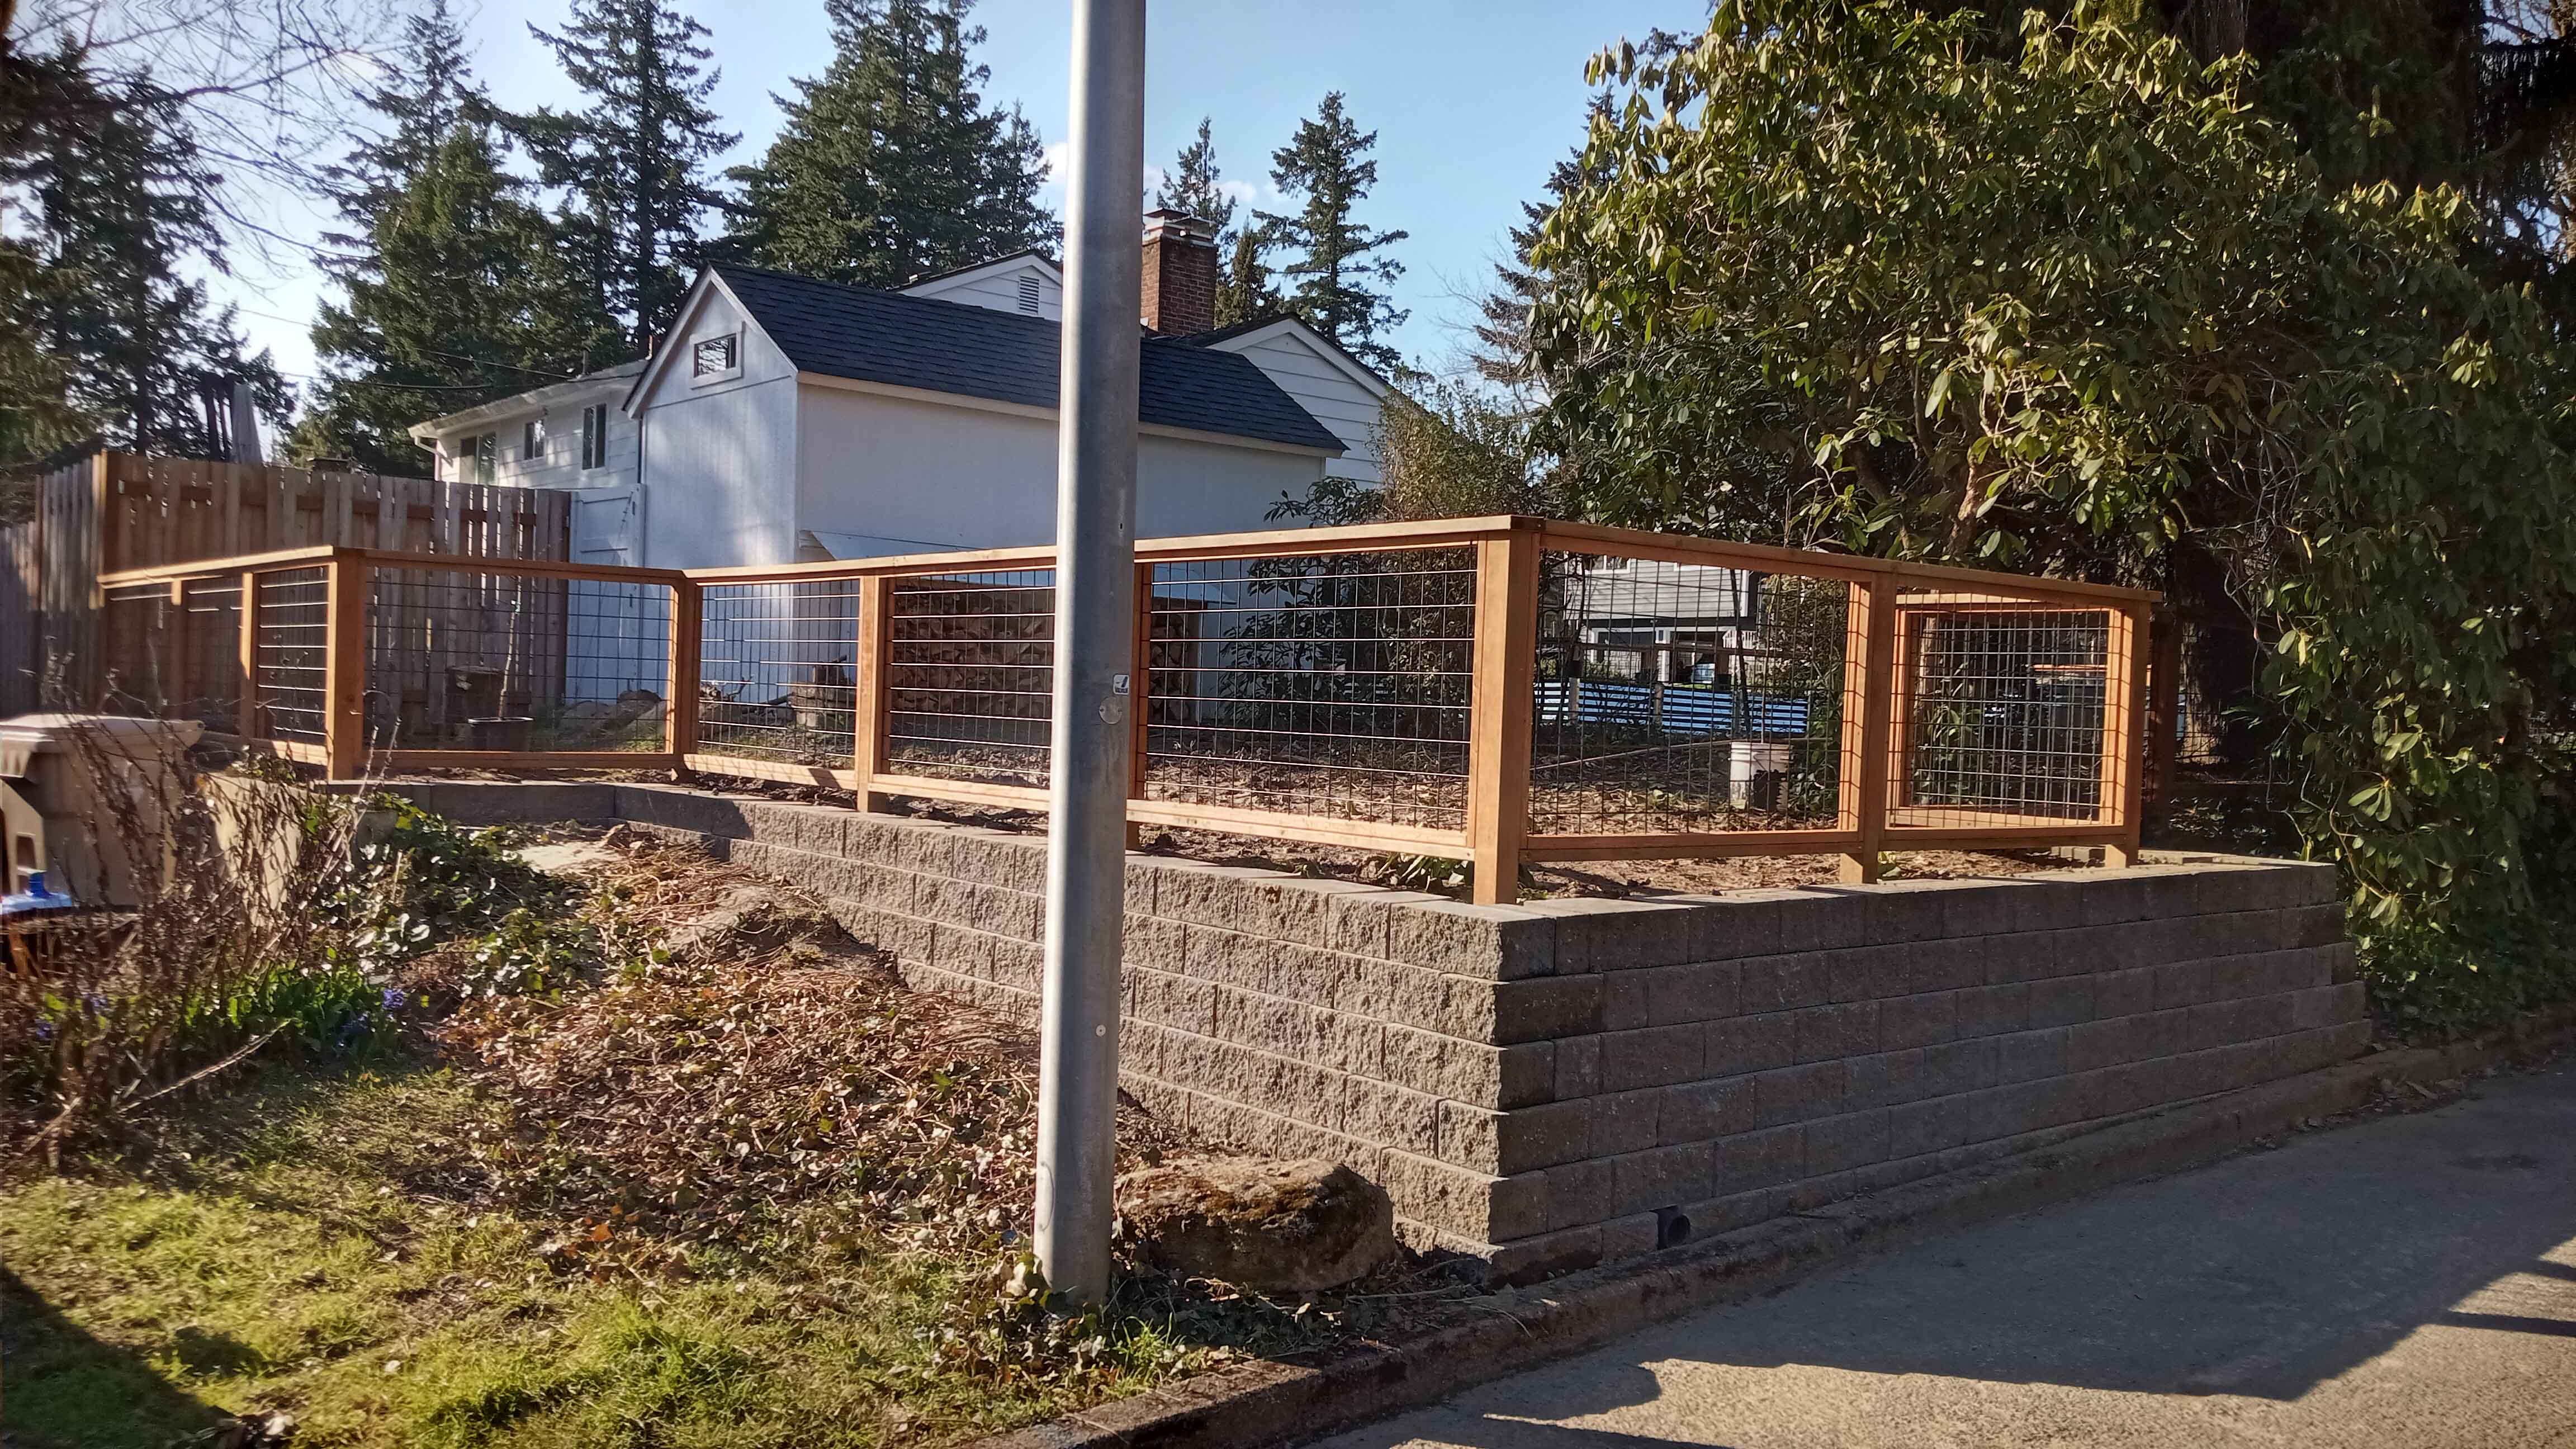 Brand new, custom built retaining wall with wood fence on top